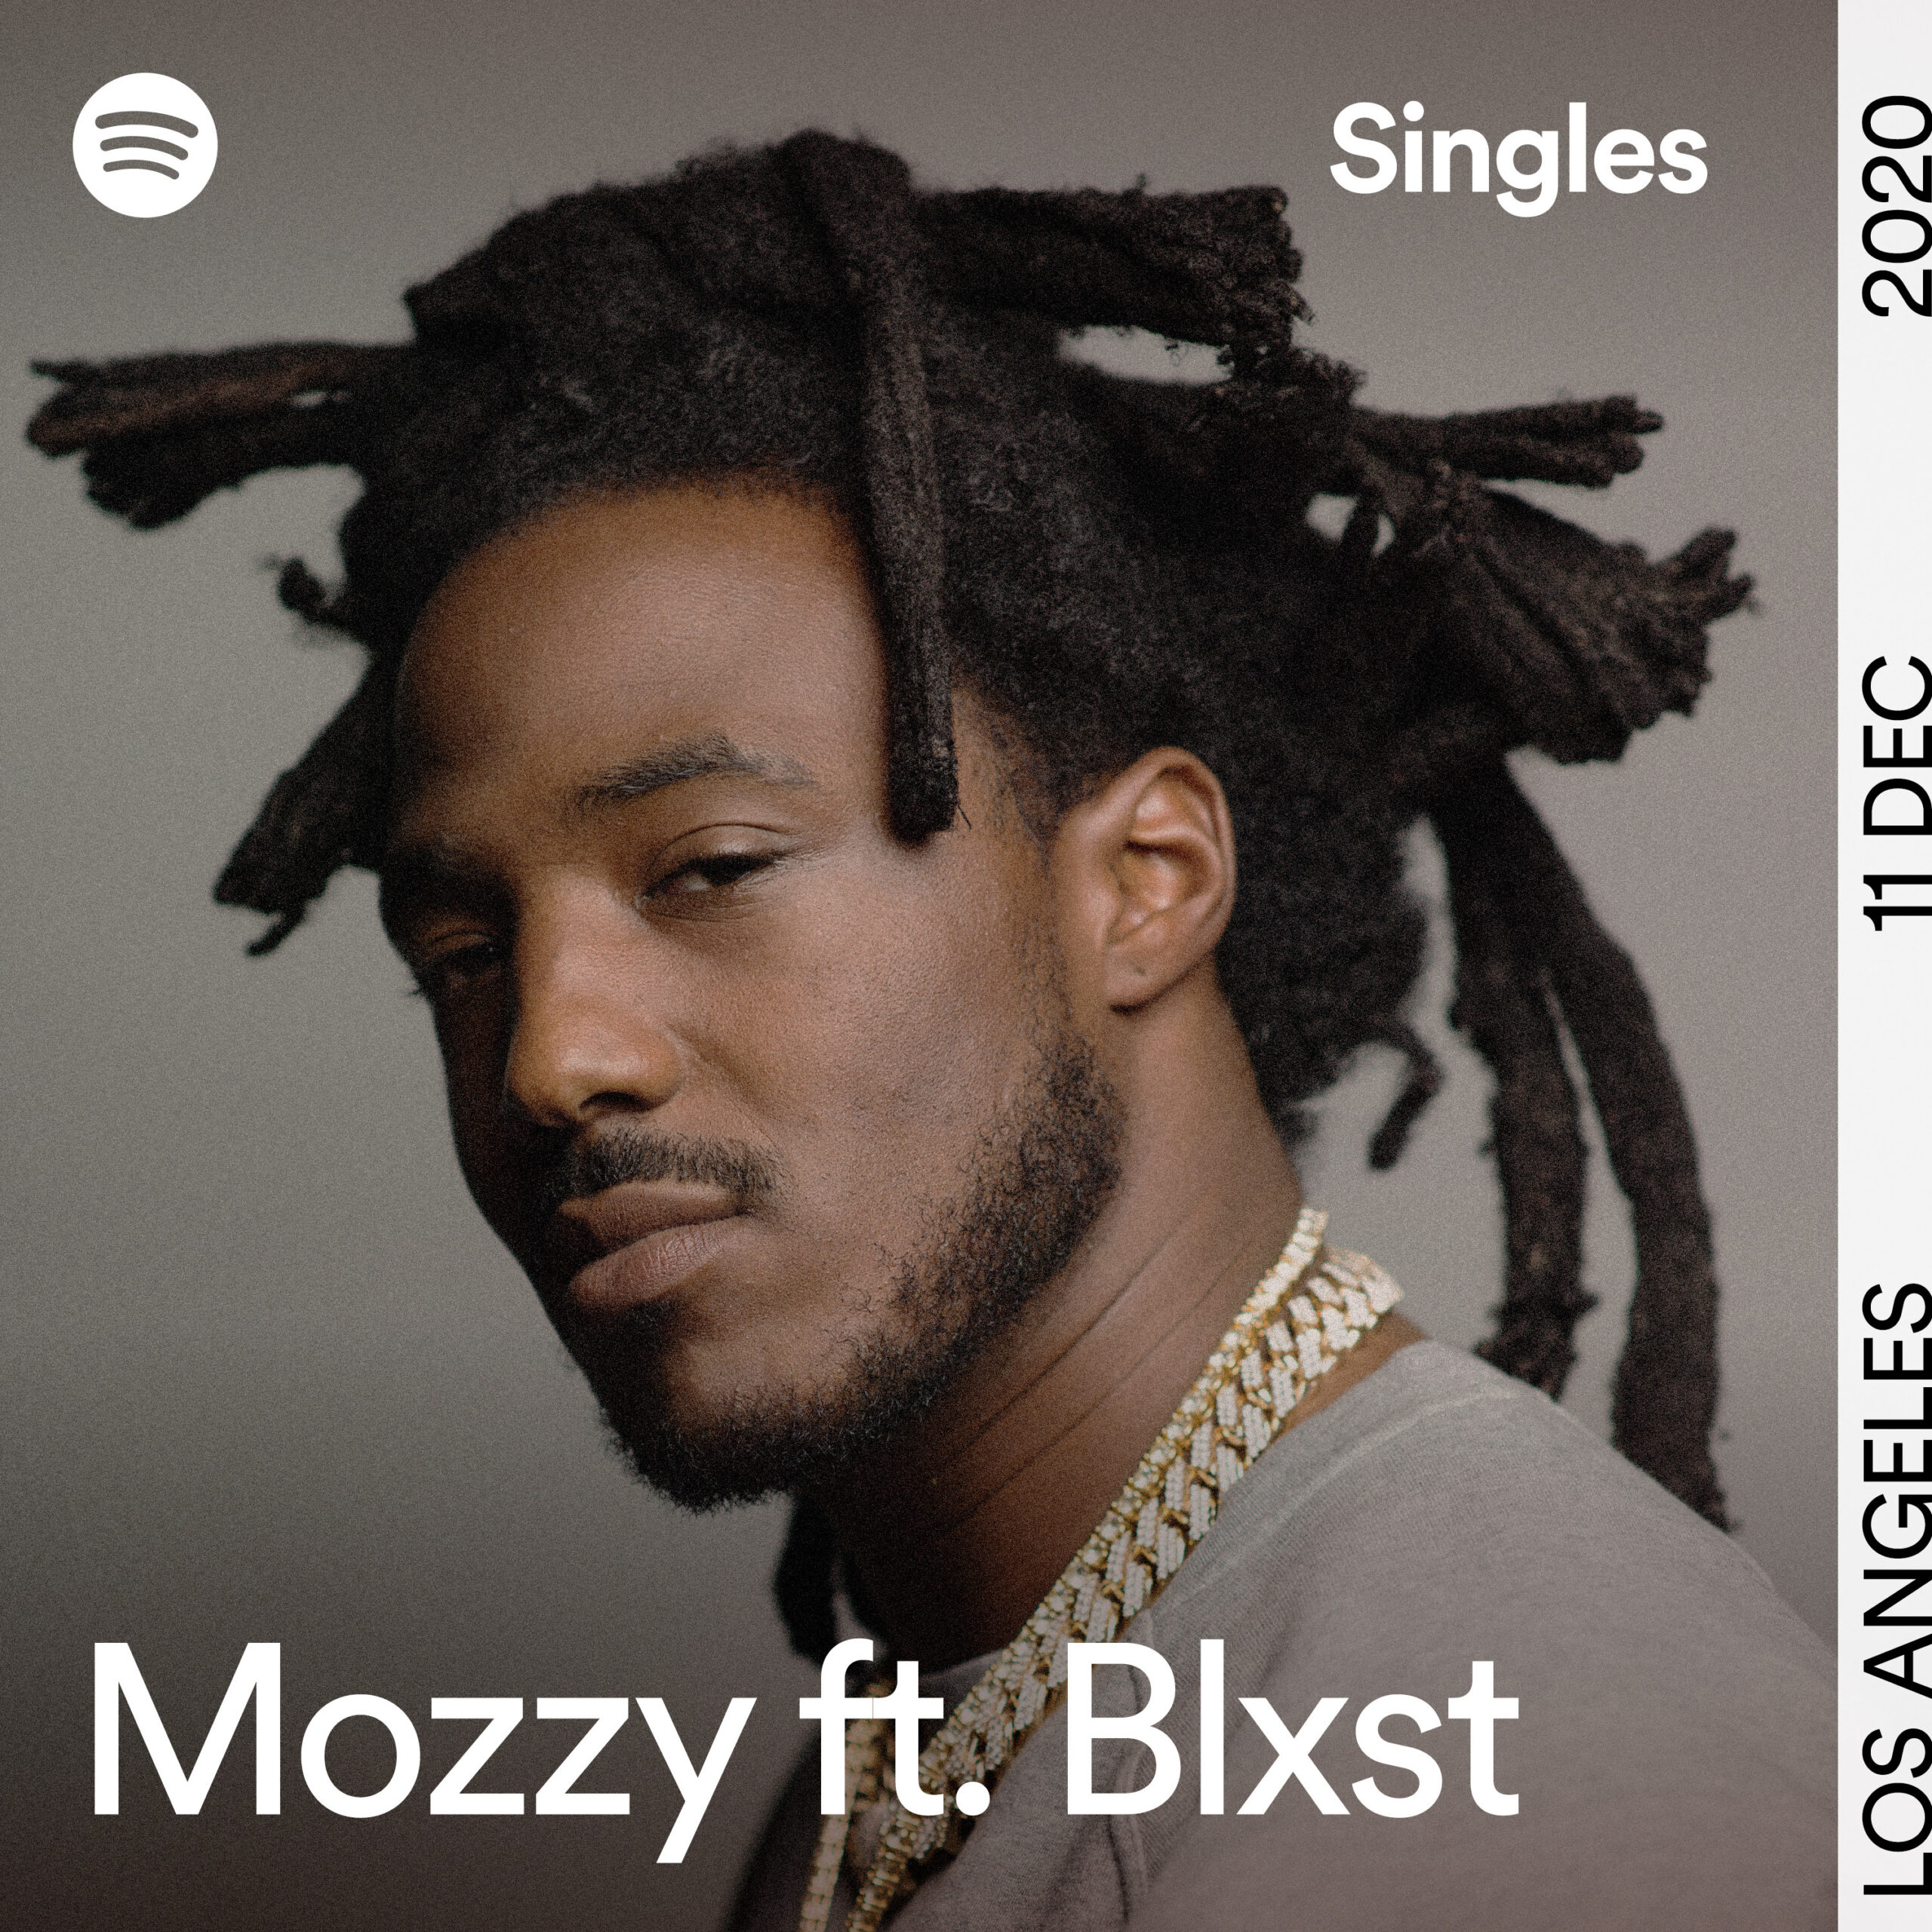 Mozzy Connects With Blxst For The New Song “Keep Hope”